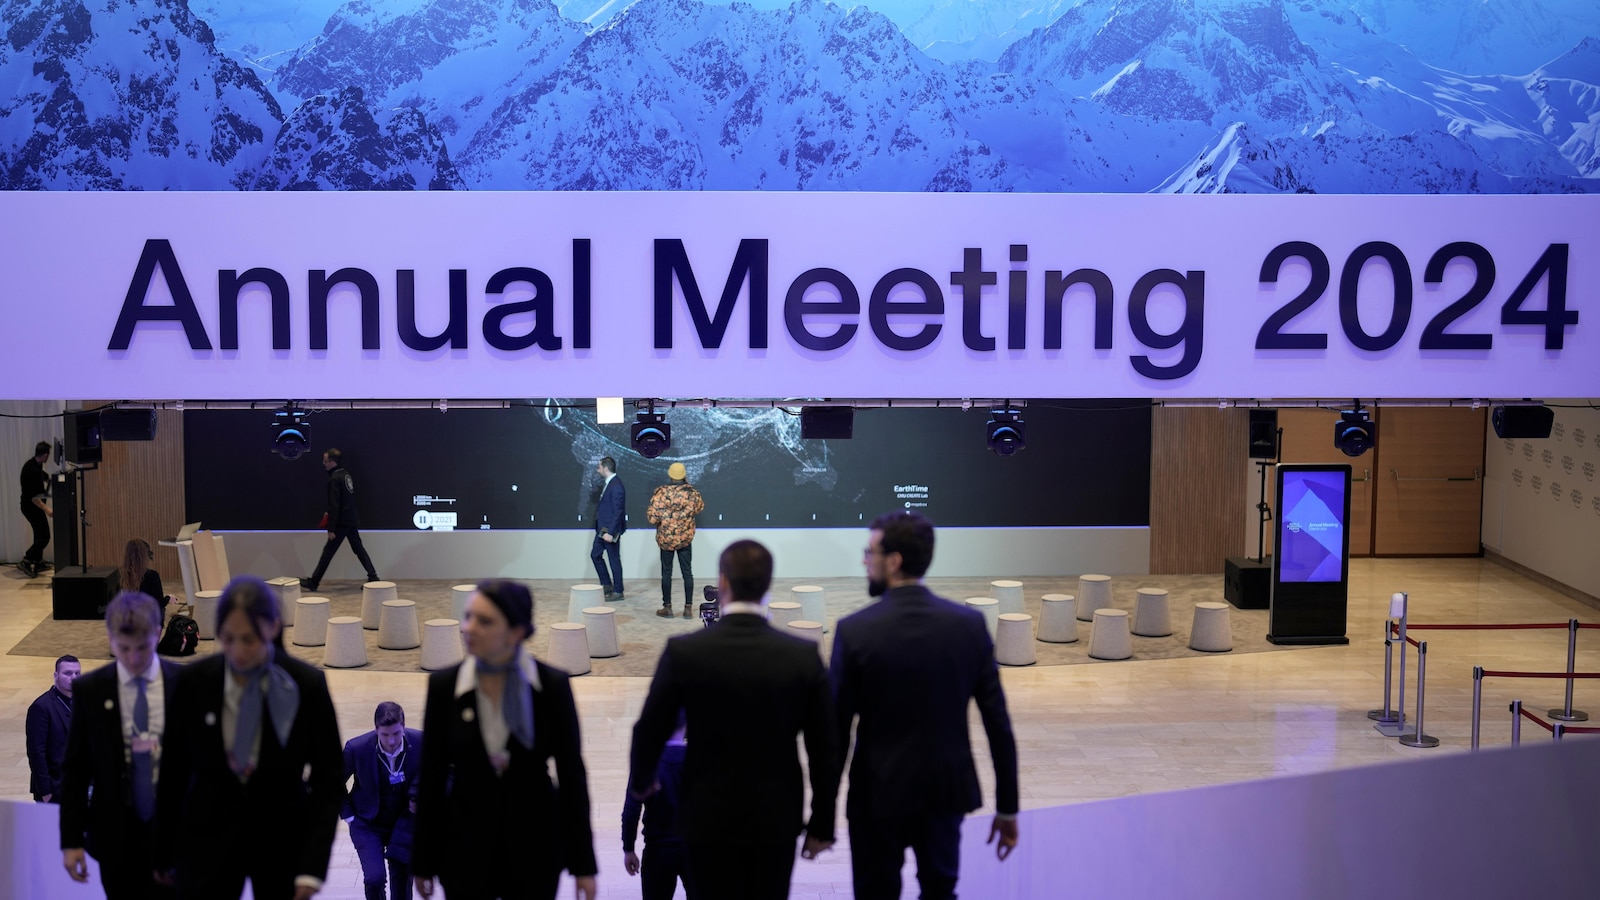 Key Topics at Davos Meeting: Conflict, Climate Change, and AI Take Center Stage